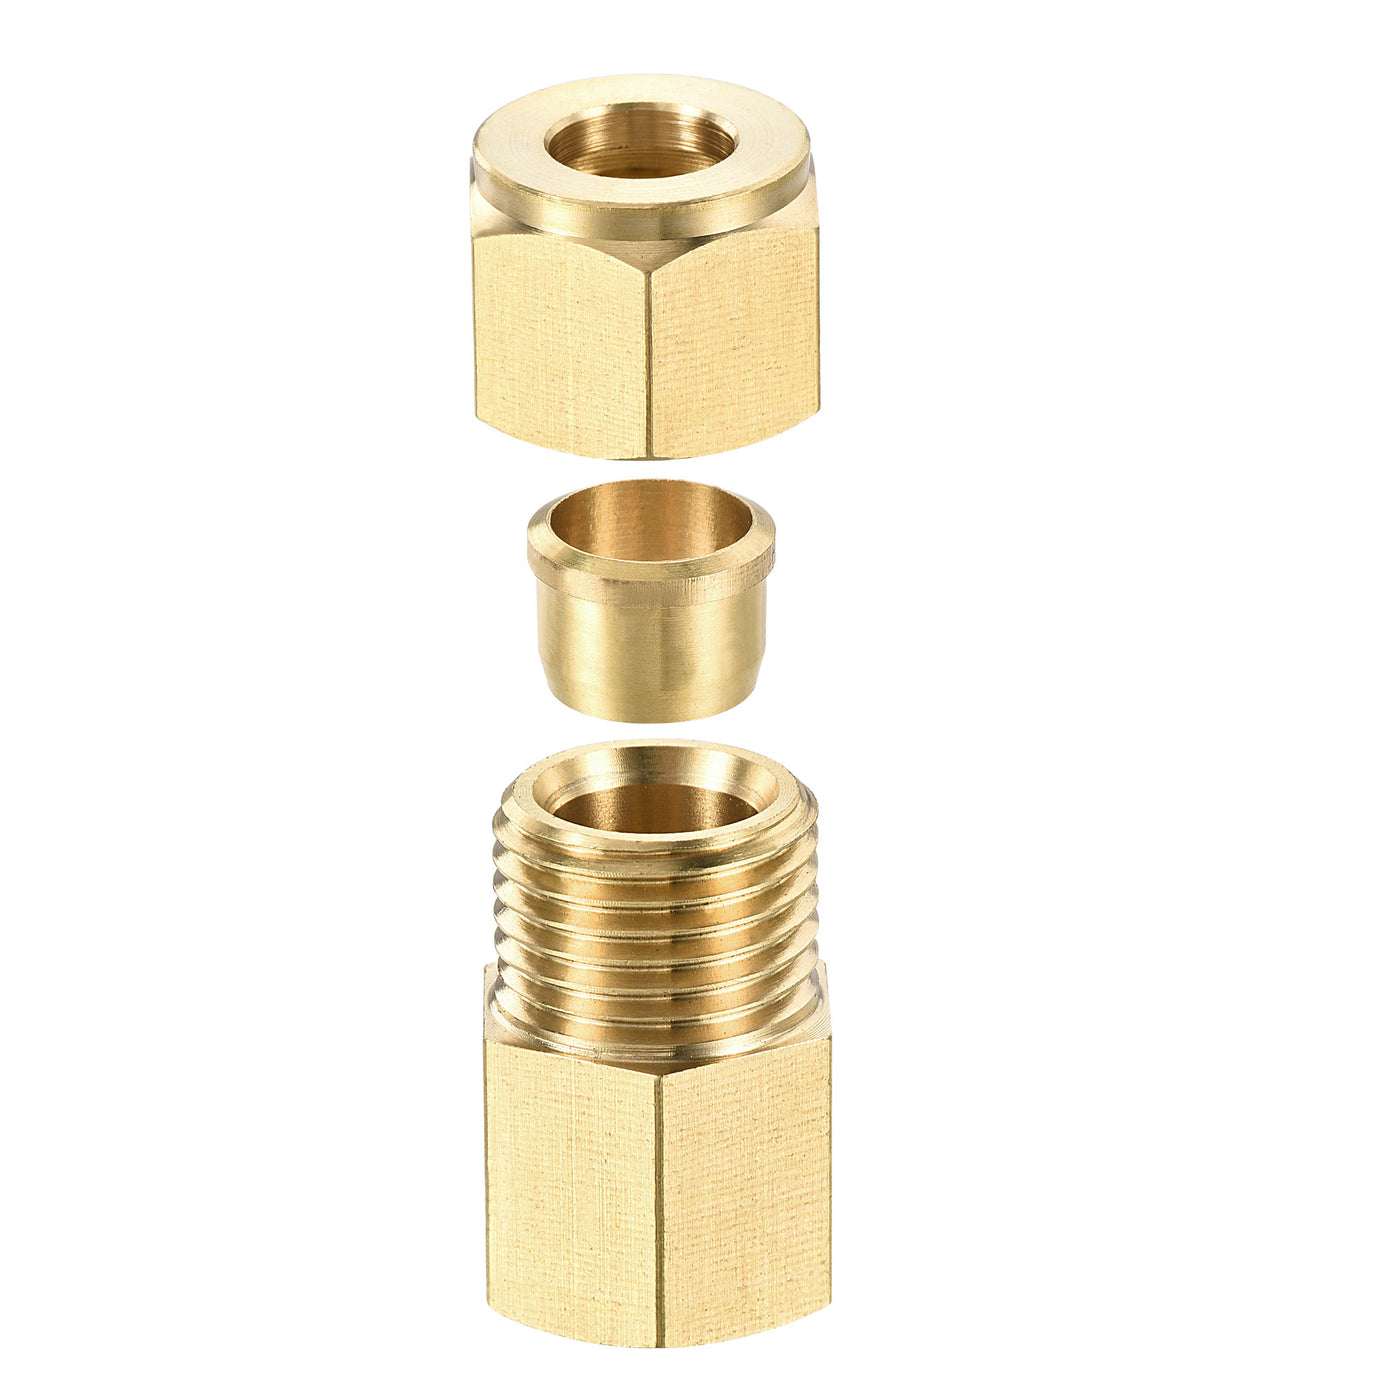 Uxcell Uxcell Compression Tube Fitting G1/4 Female Thread x 6mm Tube OD Straight Coupling Adapter Brass